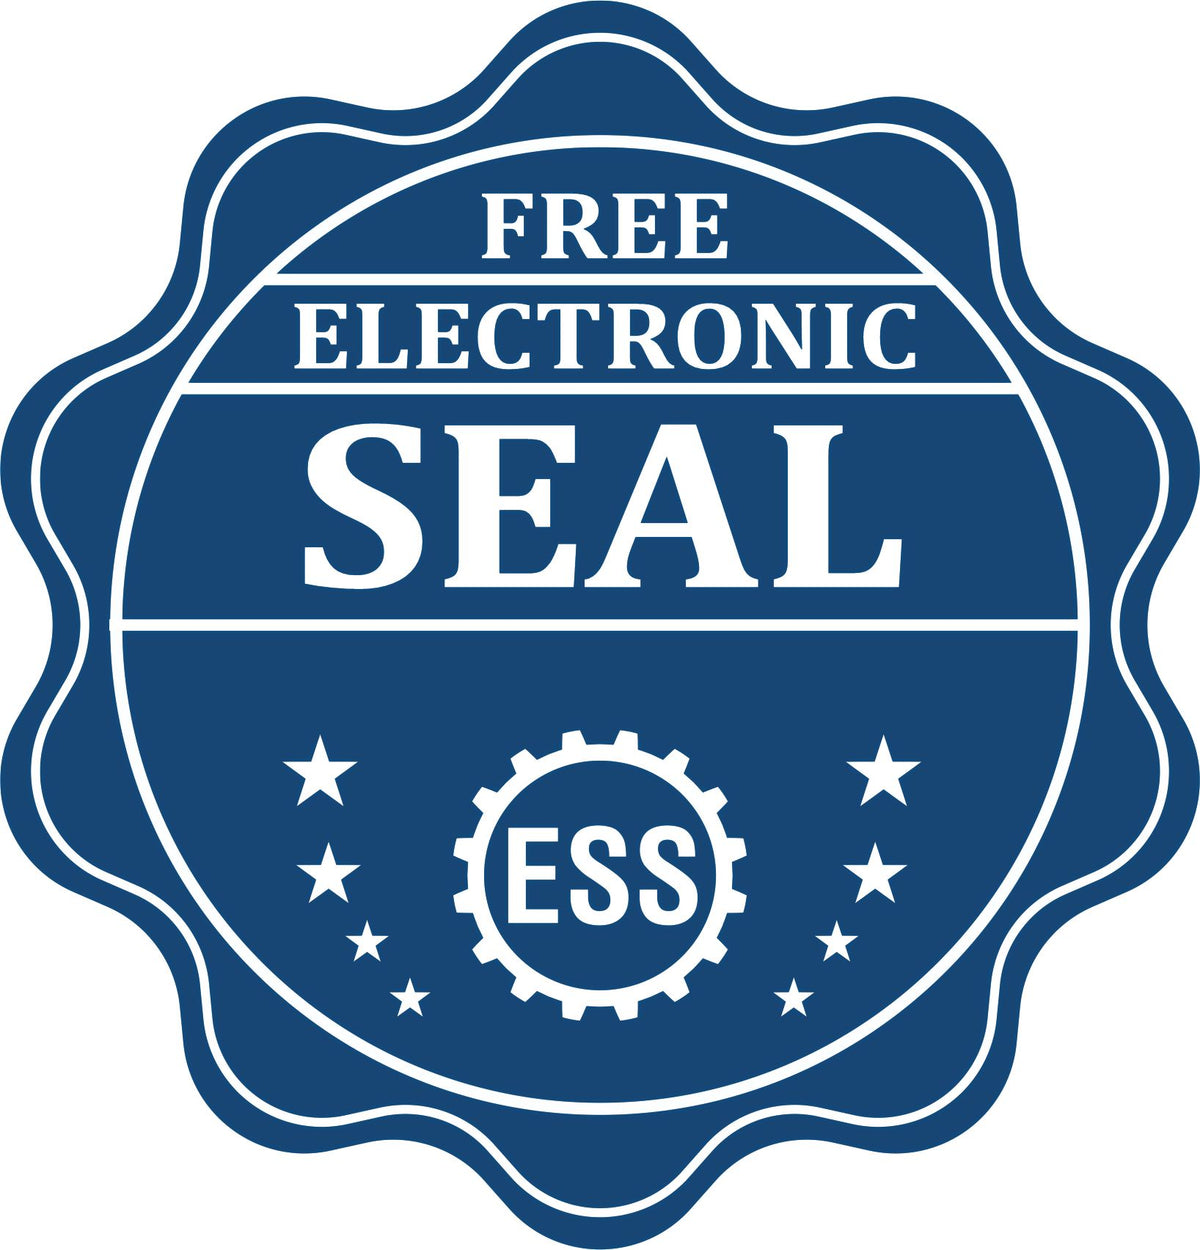 A badge showing a free electronic seal for the Hybrid Delaware Architect Seal with stars and the ESS gear on the emblem.